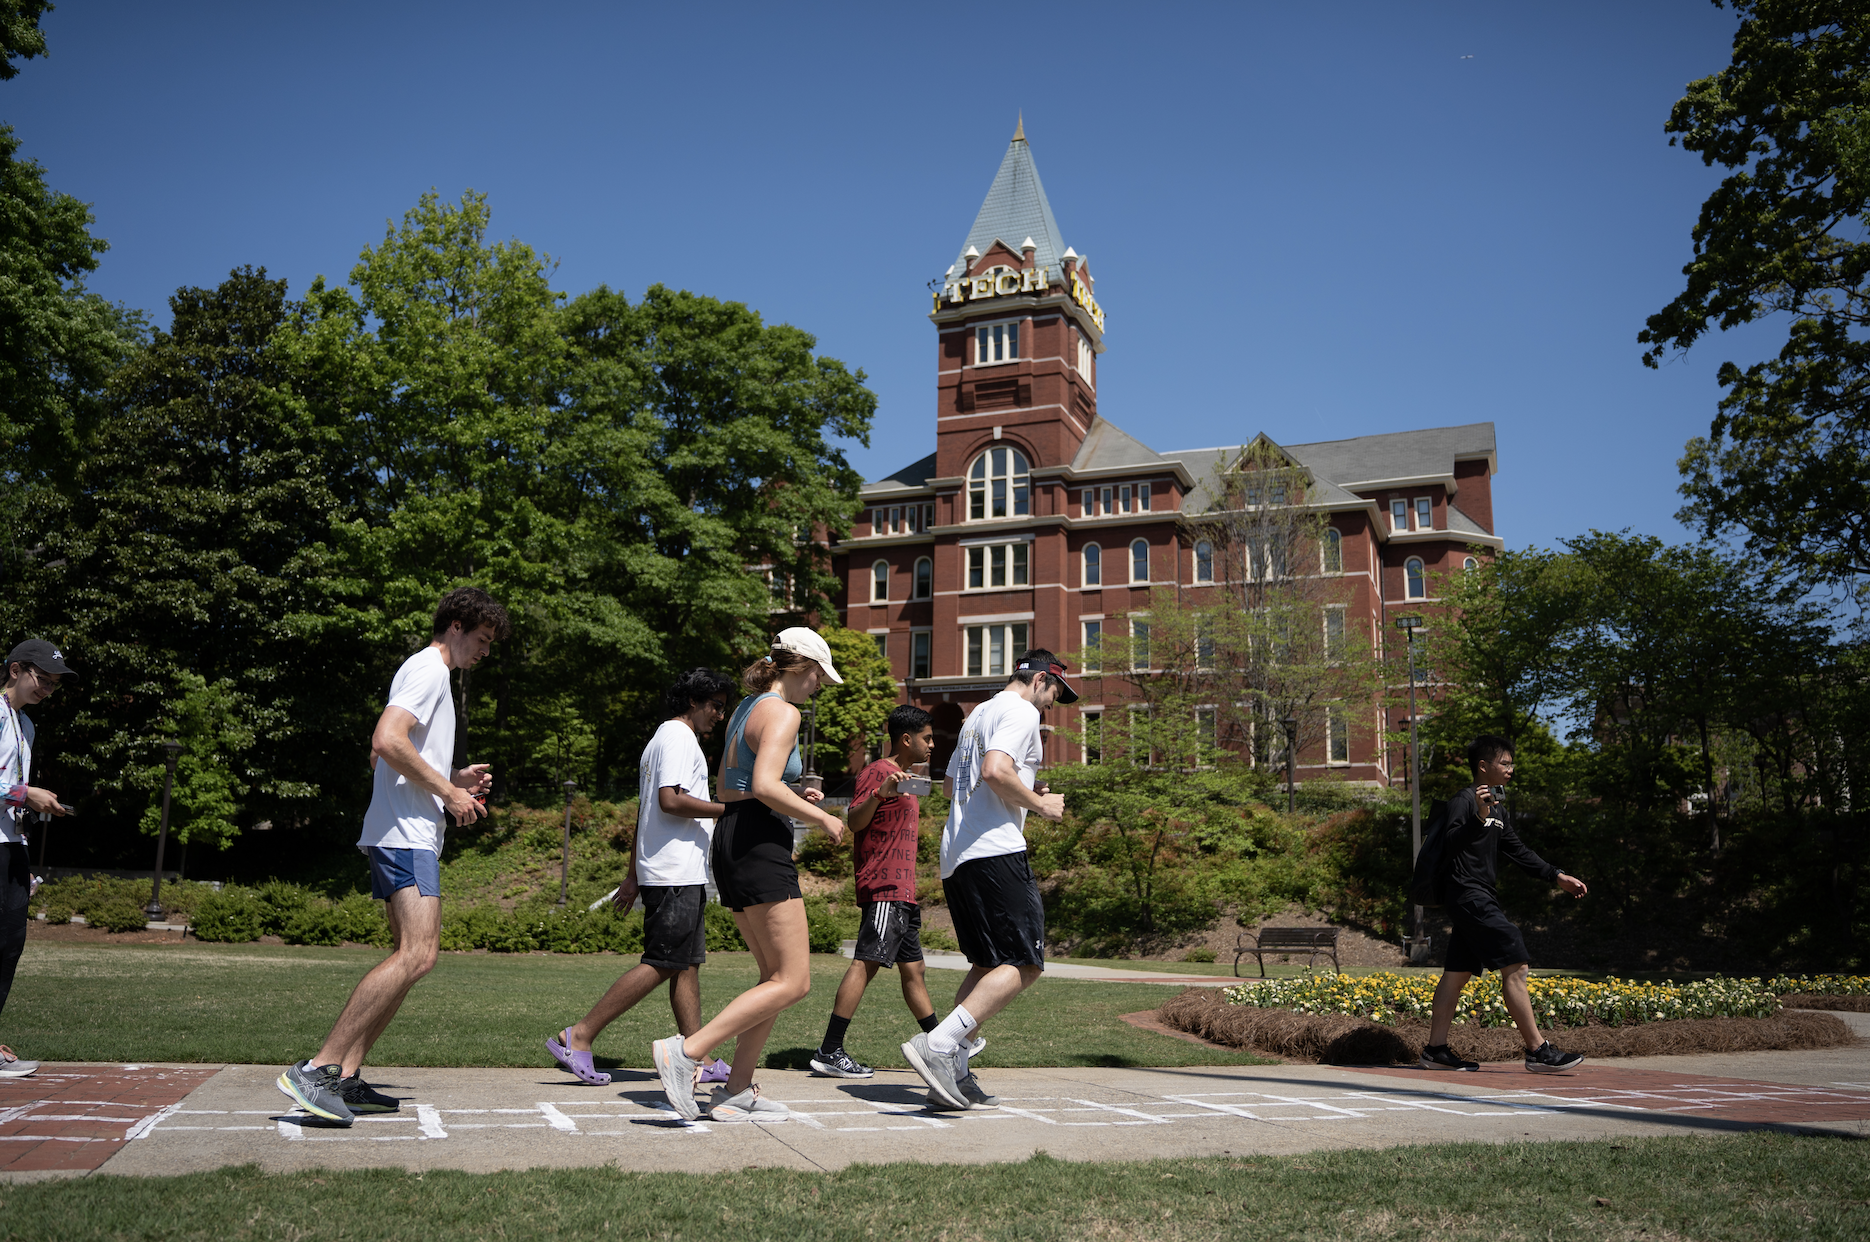 The 4.2-mile course stretched across Georgia Tech's entire campus and was drawn with some efficient engineering ingenuity.